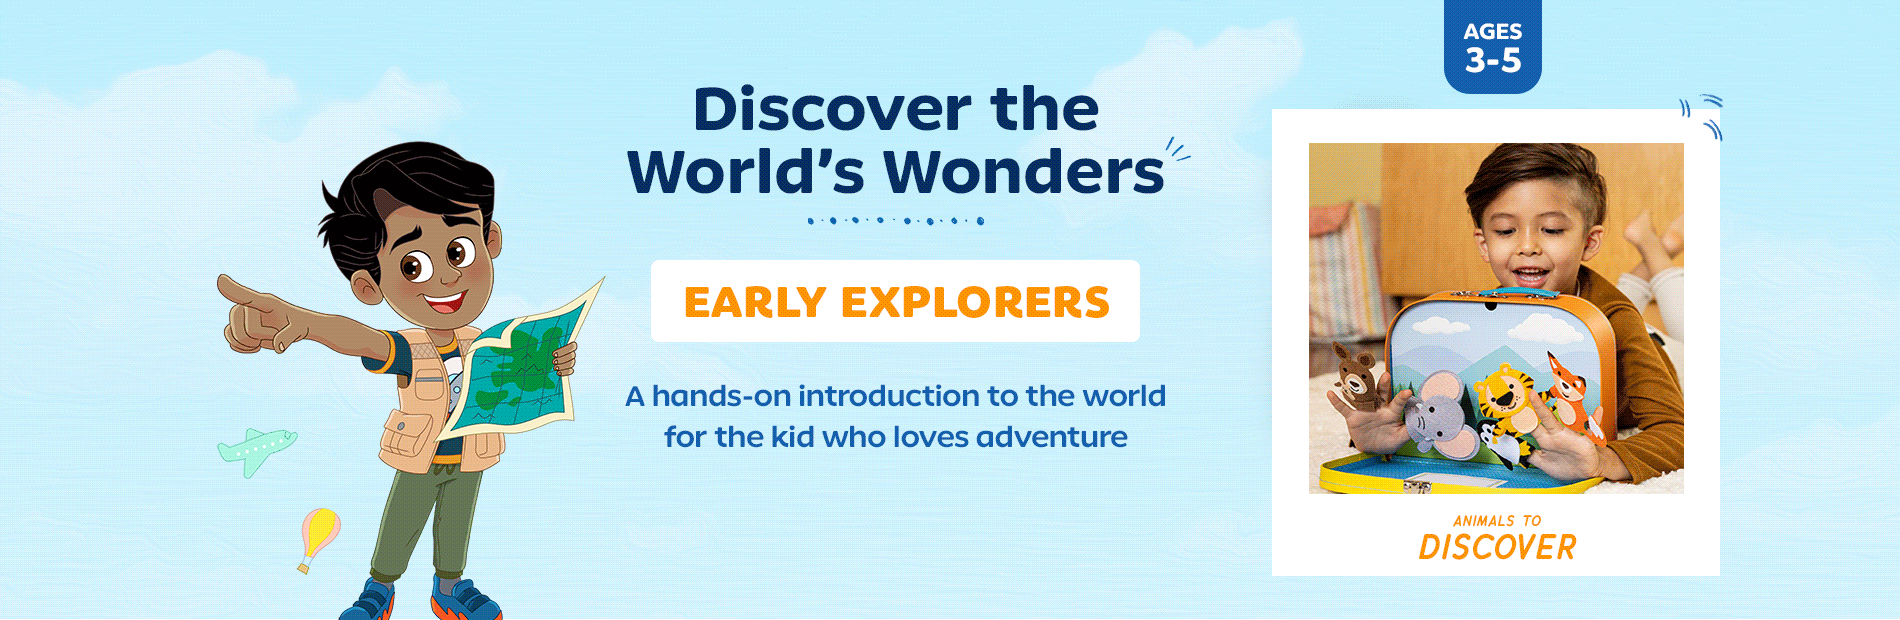 Discover the World's Wonders EARLY EXPLORERS A hands-on introduction to the world for the kid who loves adventure